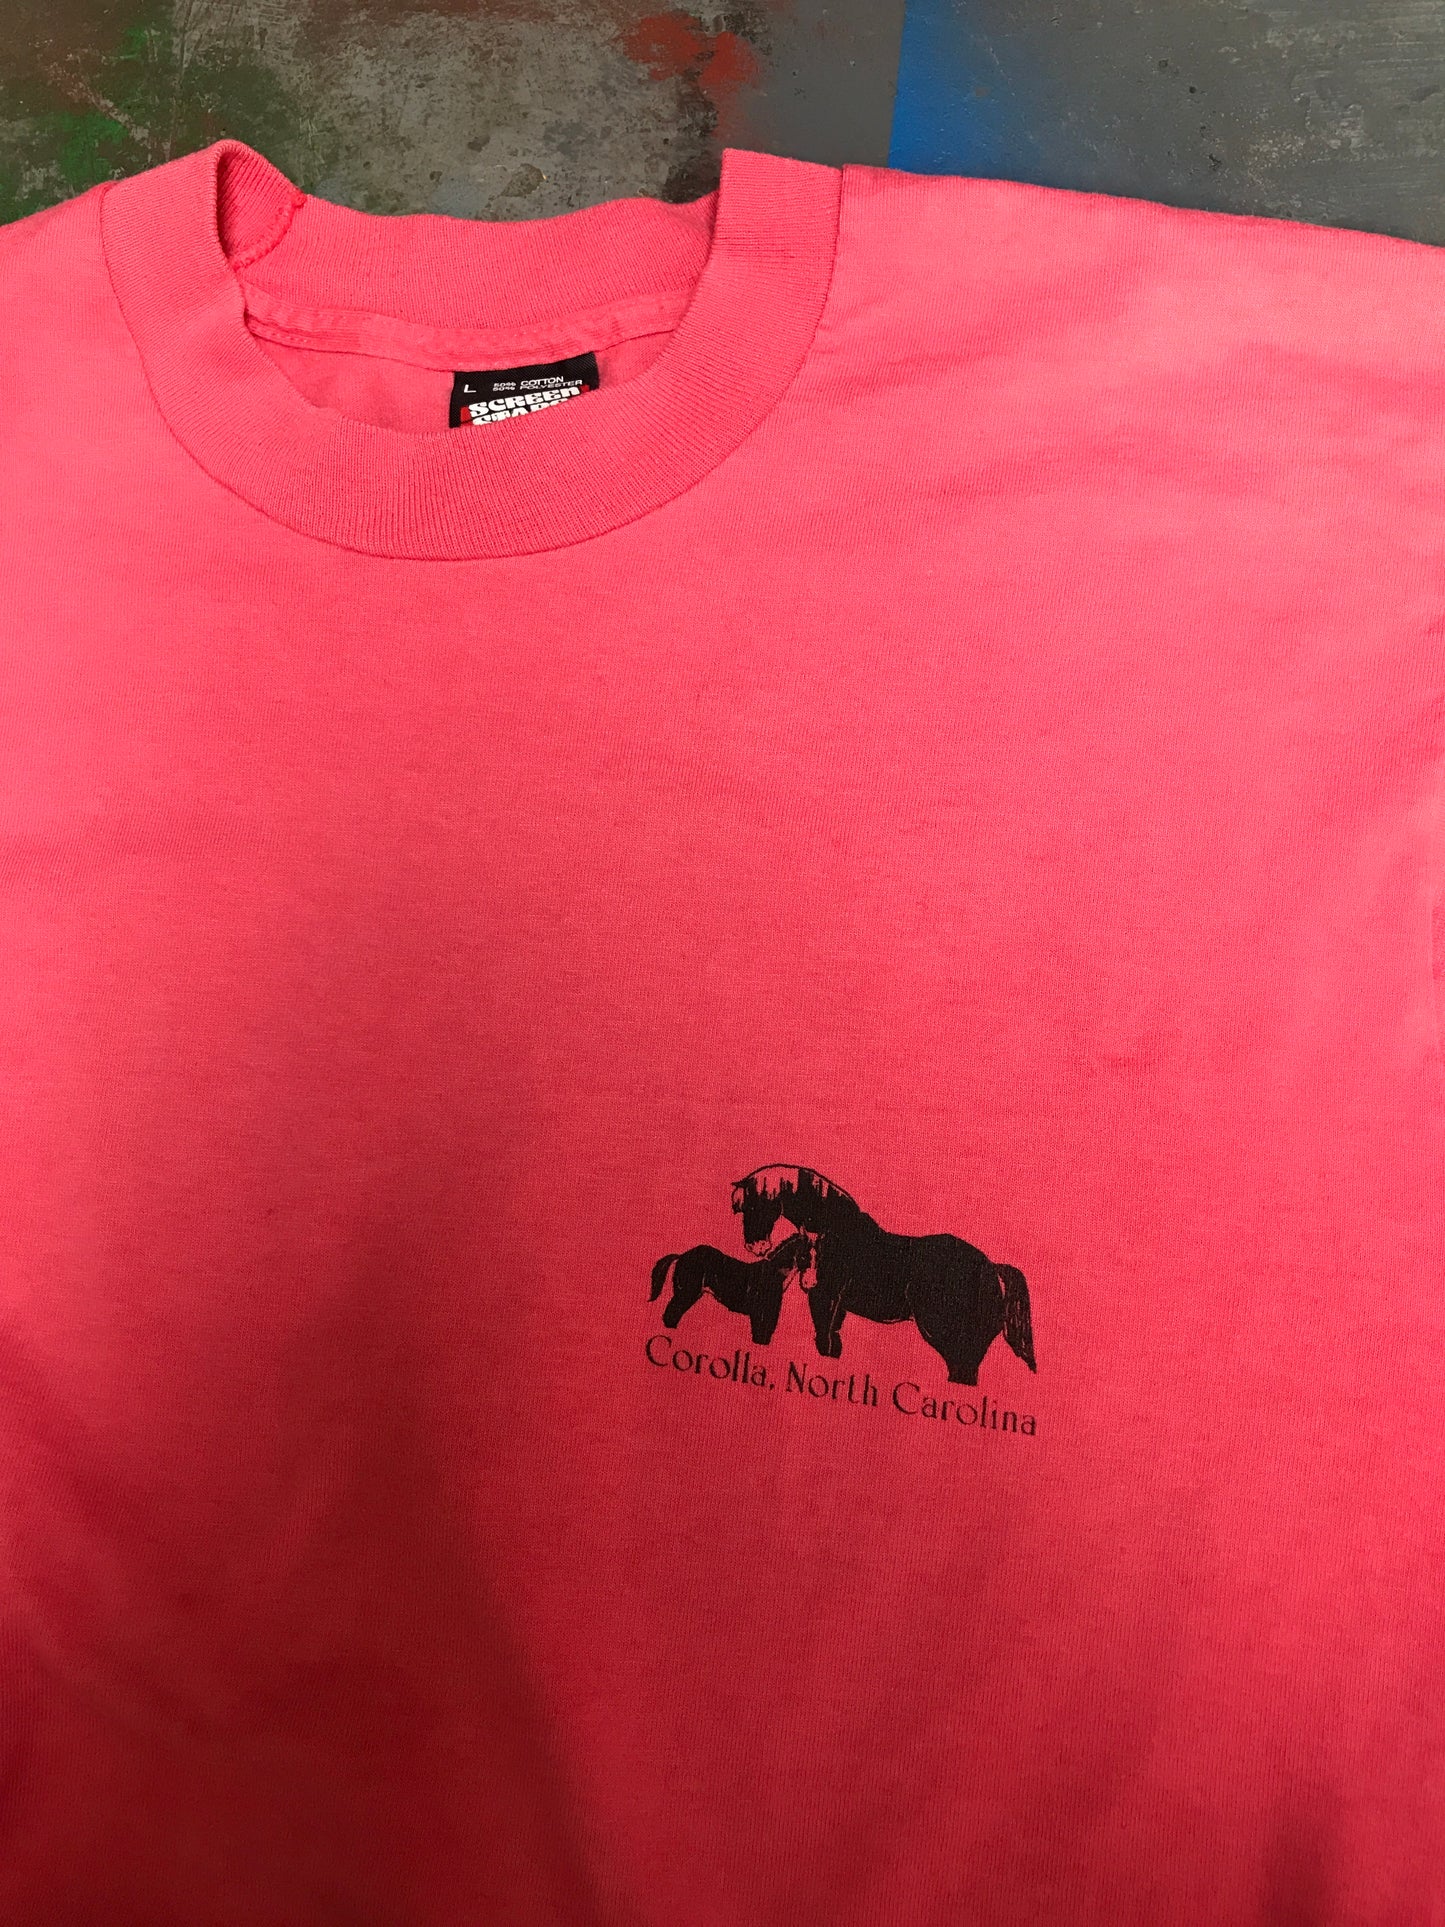 Save the Horses Vintage T-shirt